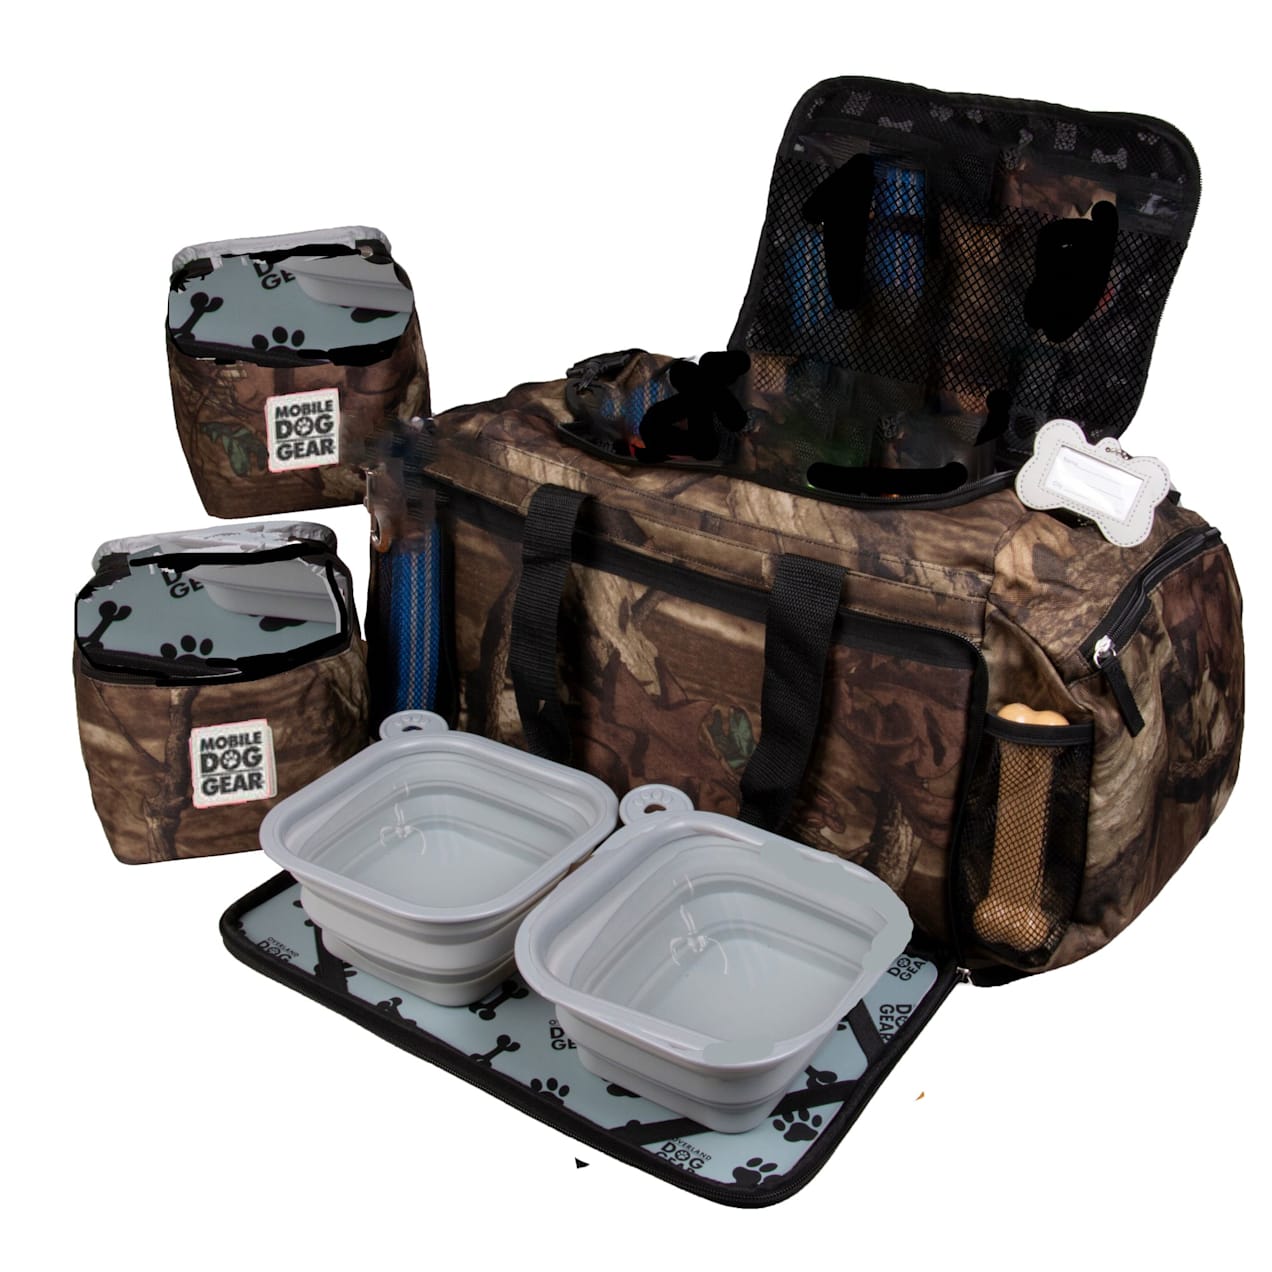 Mobile-Dog-Gear-Camo-Puppy-Bag-Holiday-Sale-Interior-Dividers